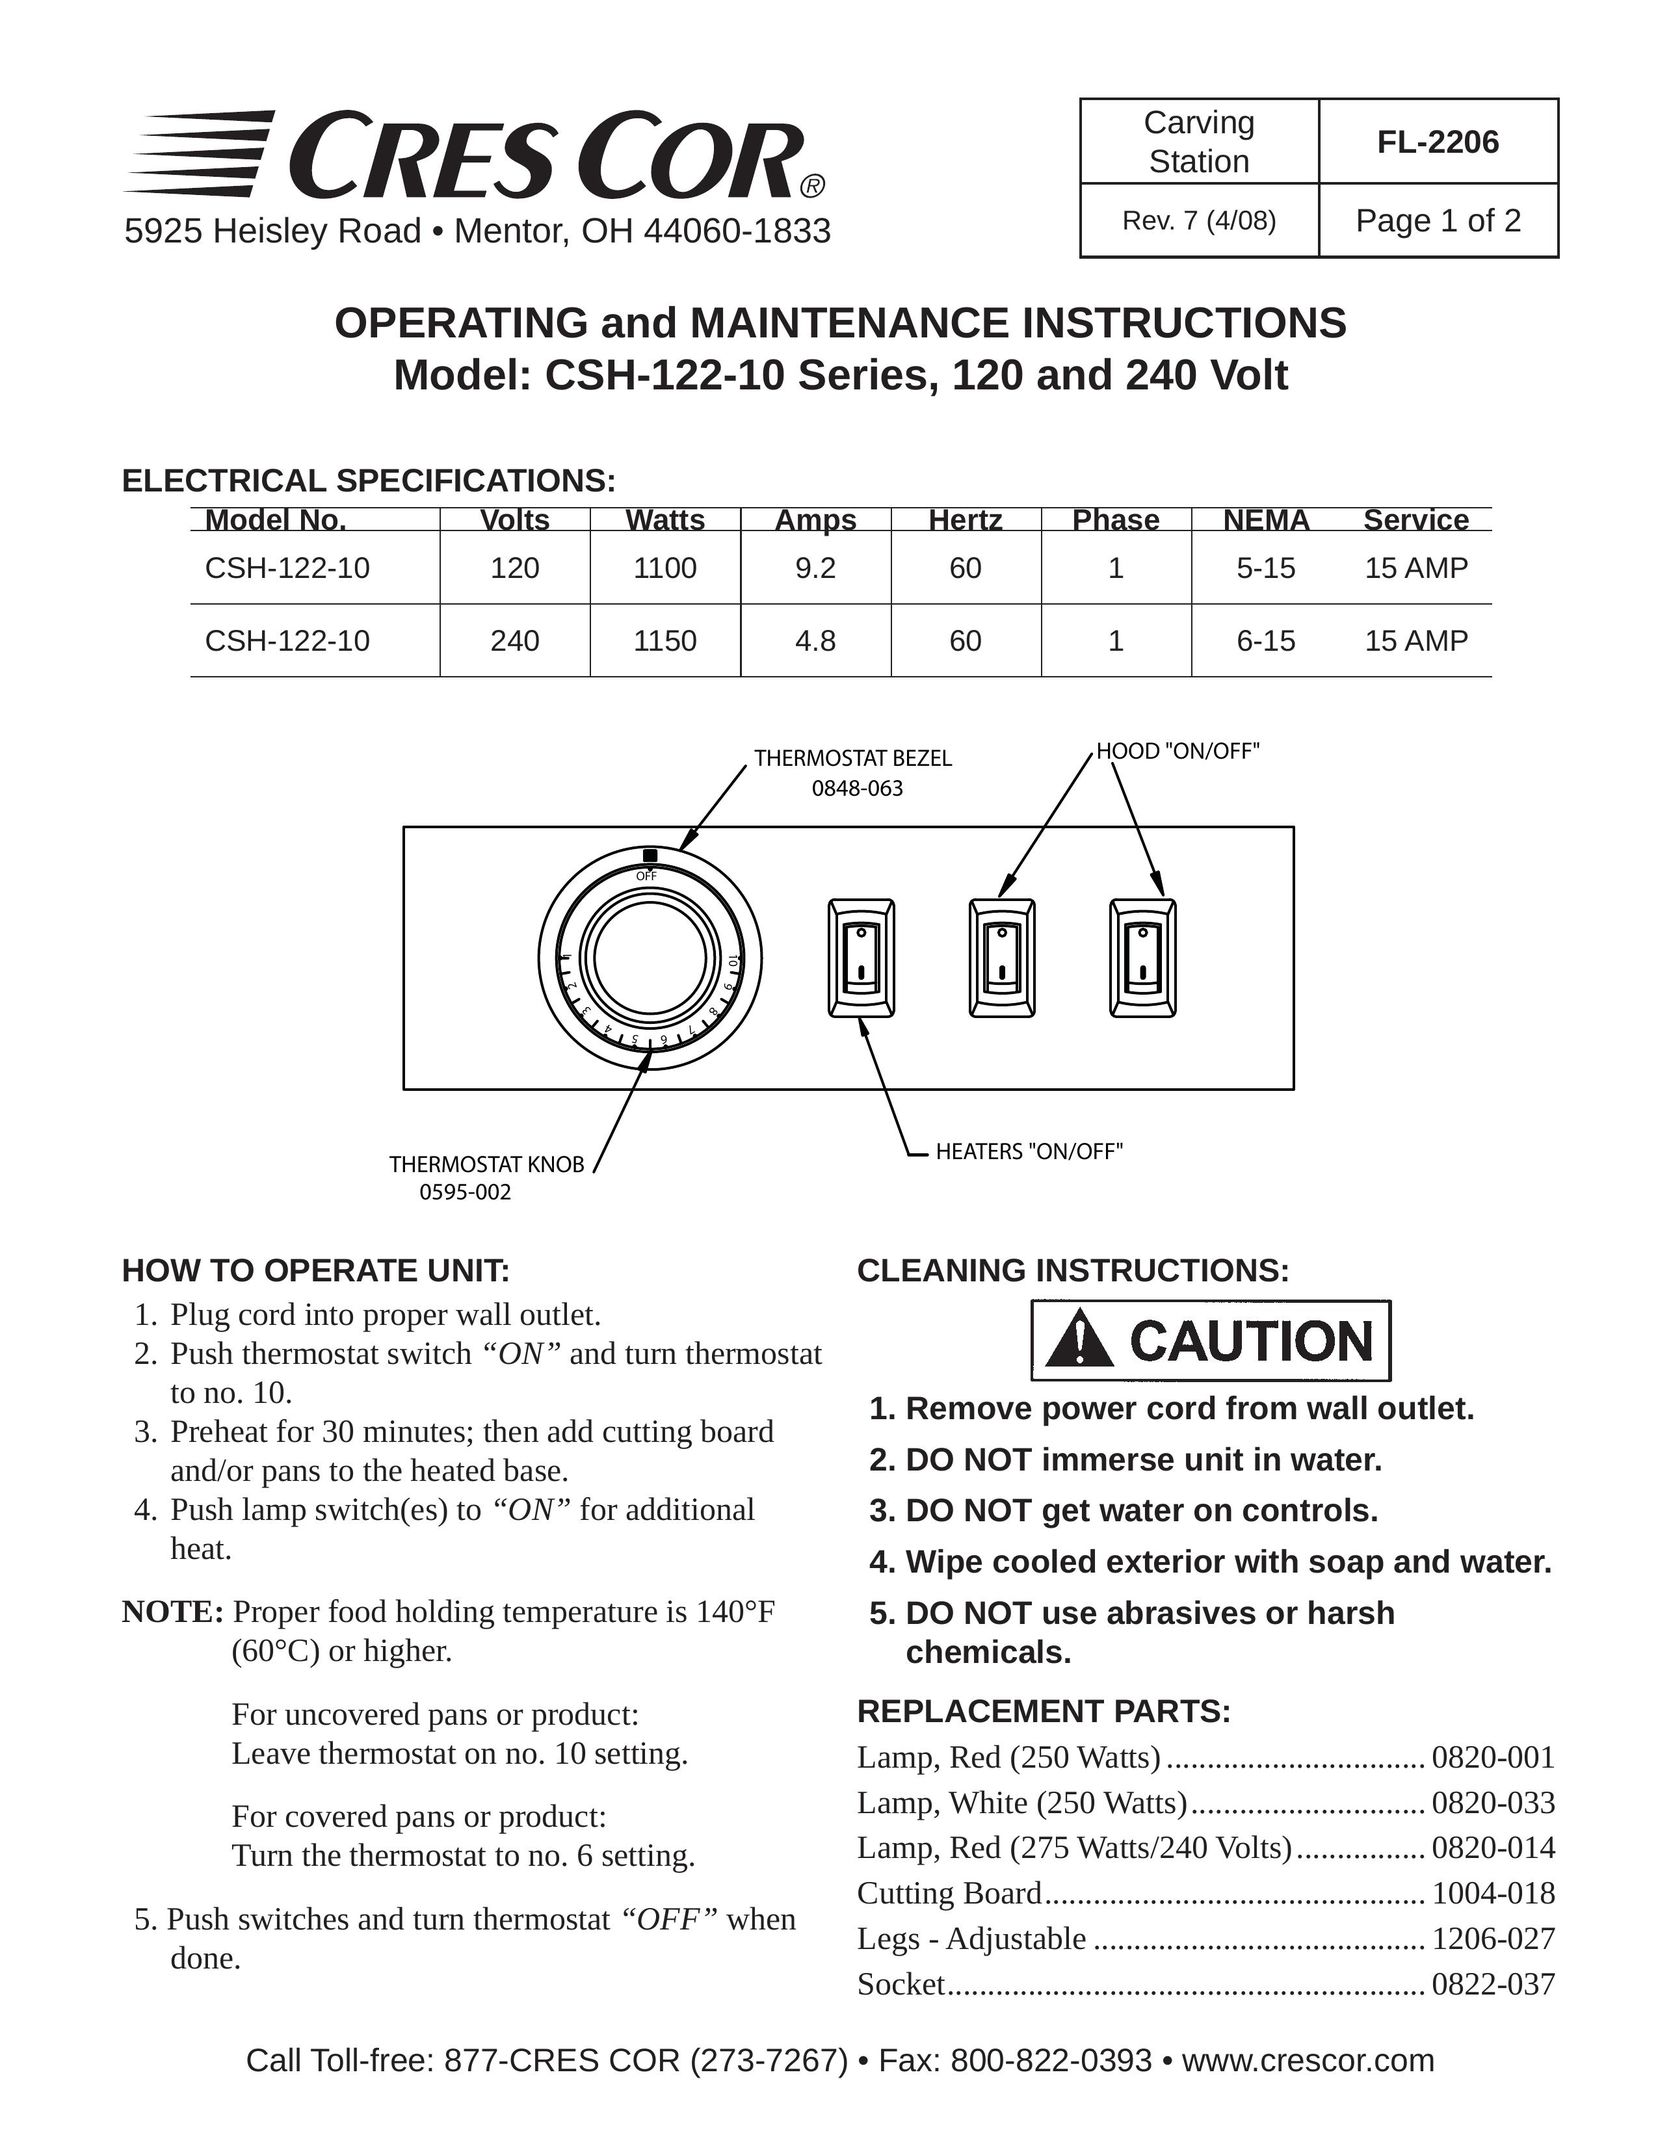 Cres Cor CSH-122-10 Series Thermostat User Manual